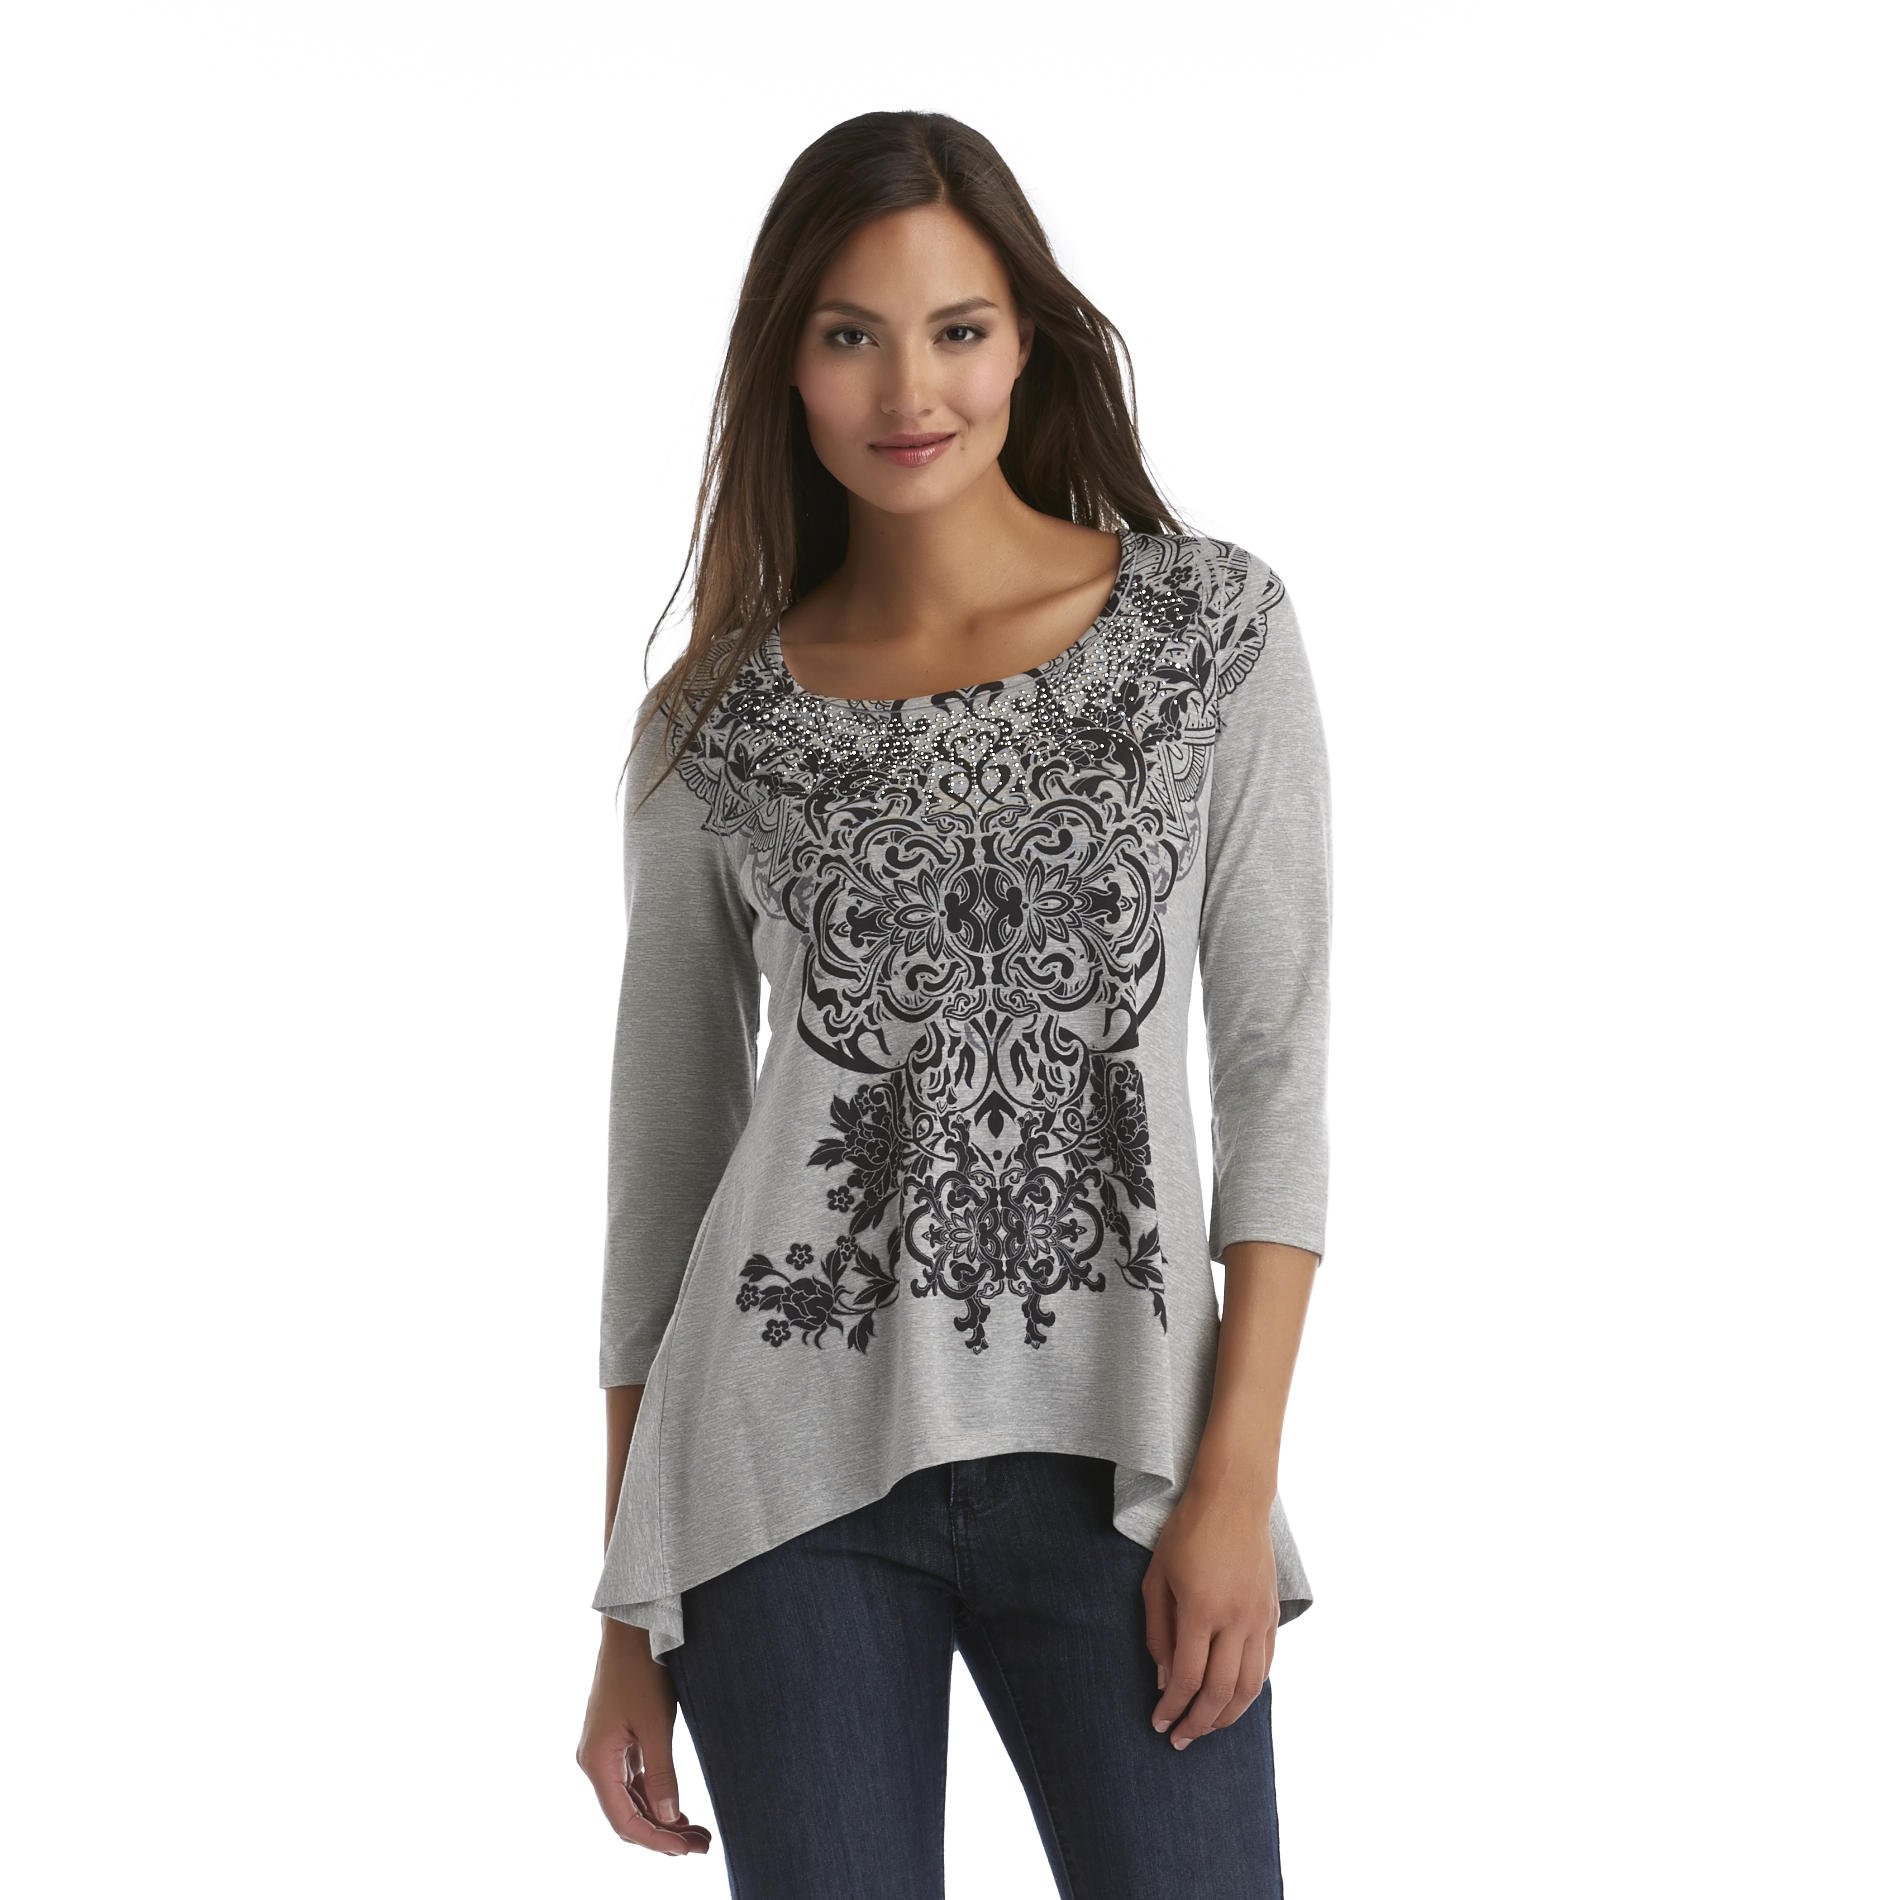 Live and Let Live Women's Peplum Top - Rhinestones & Floral